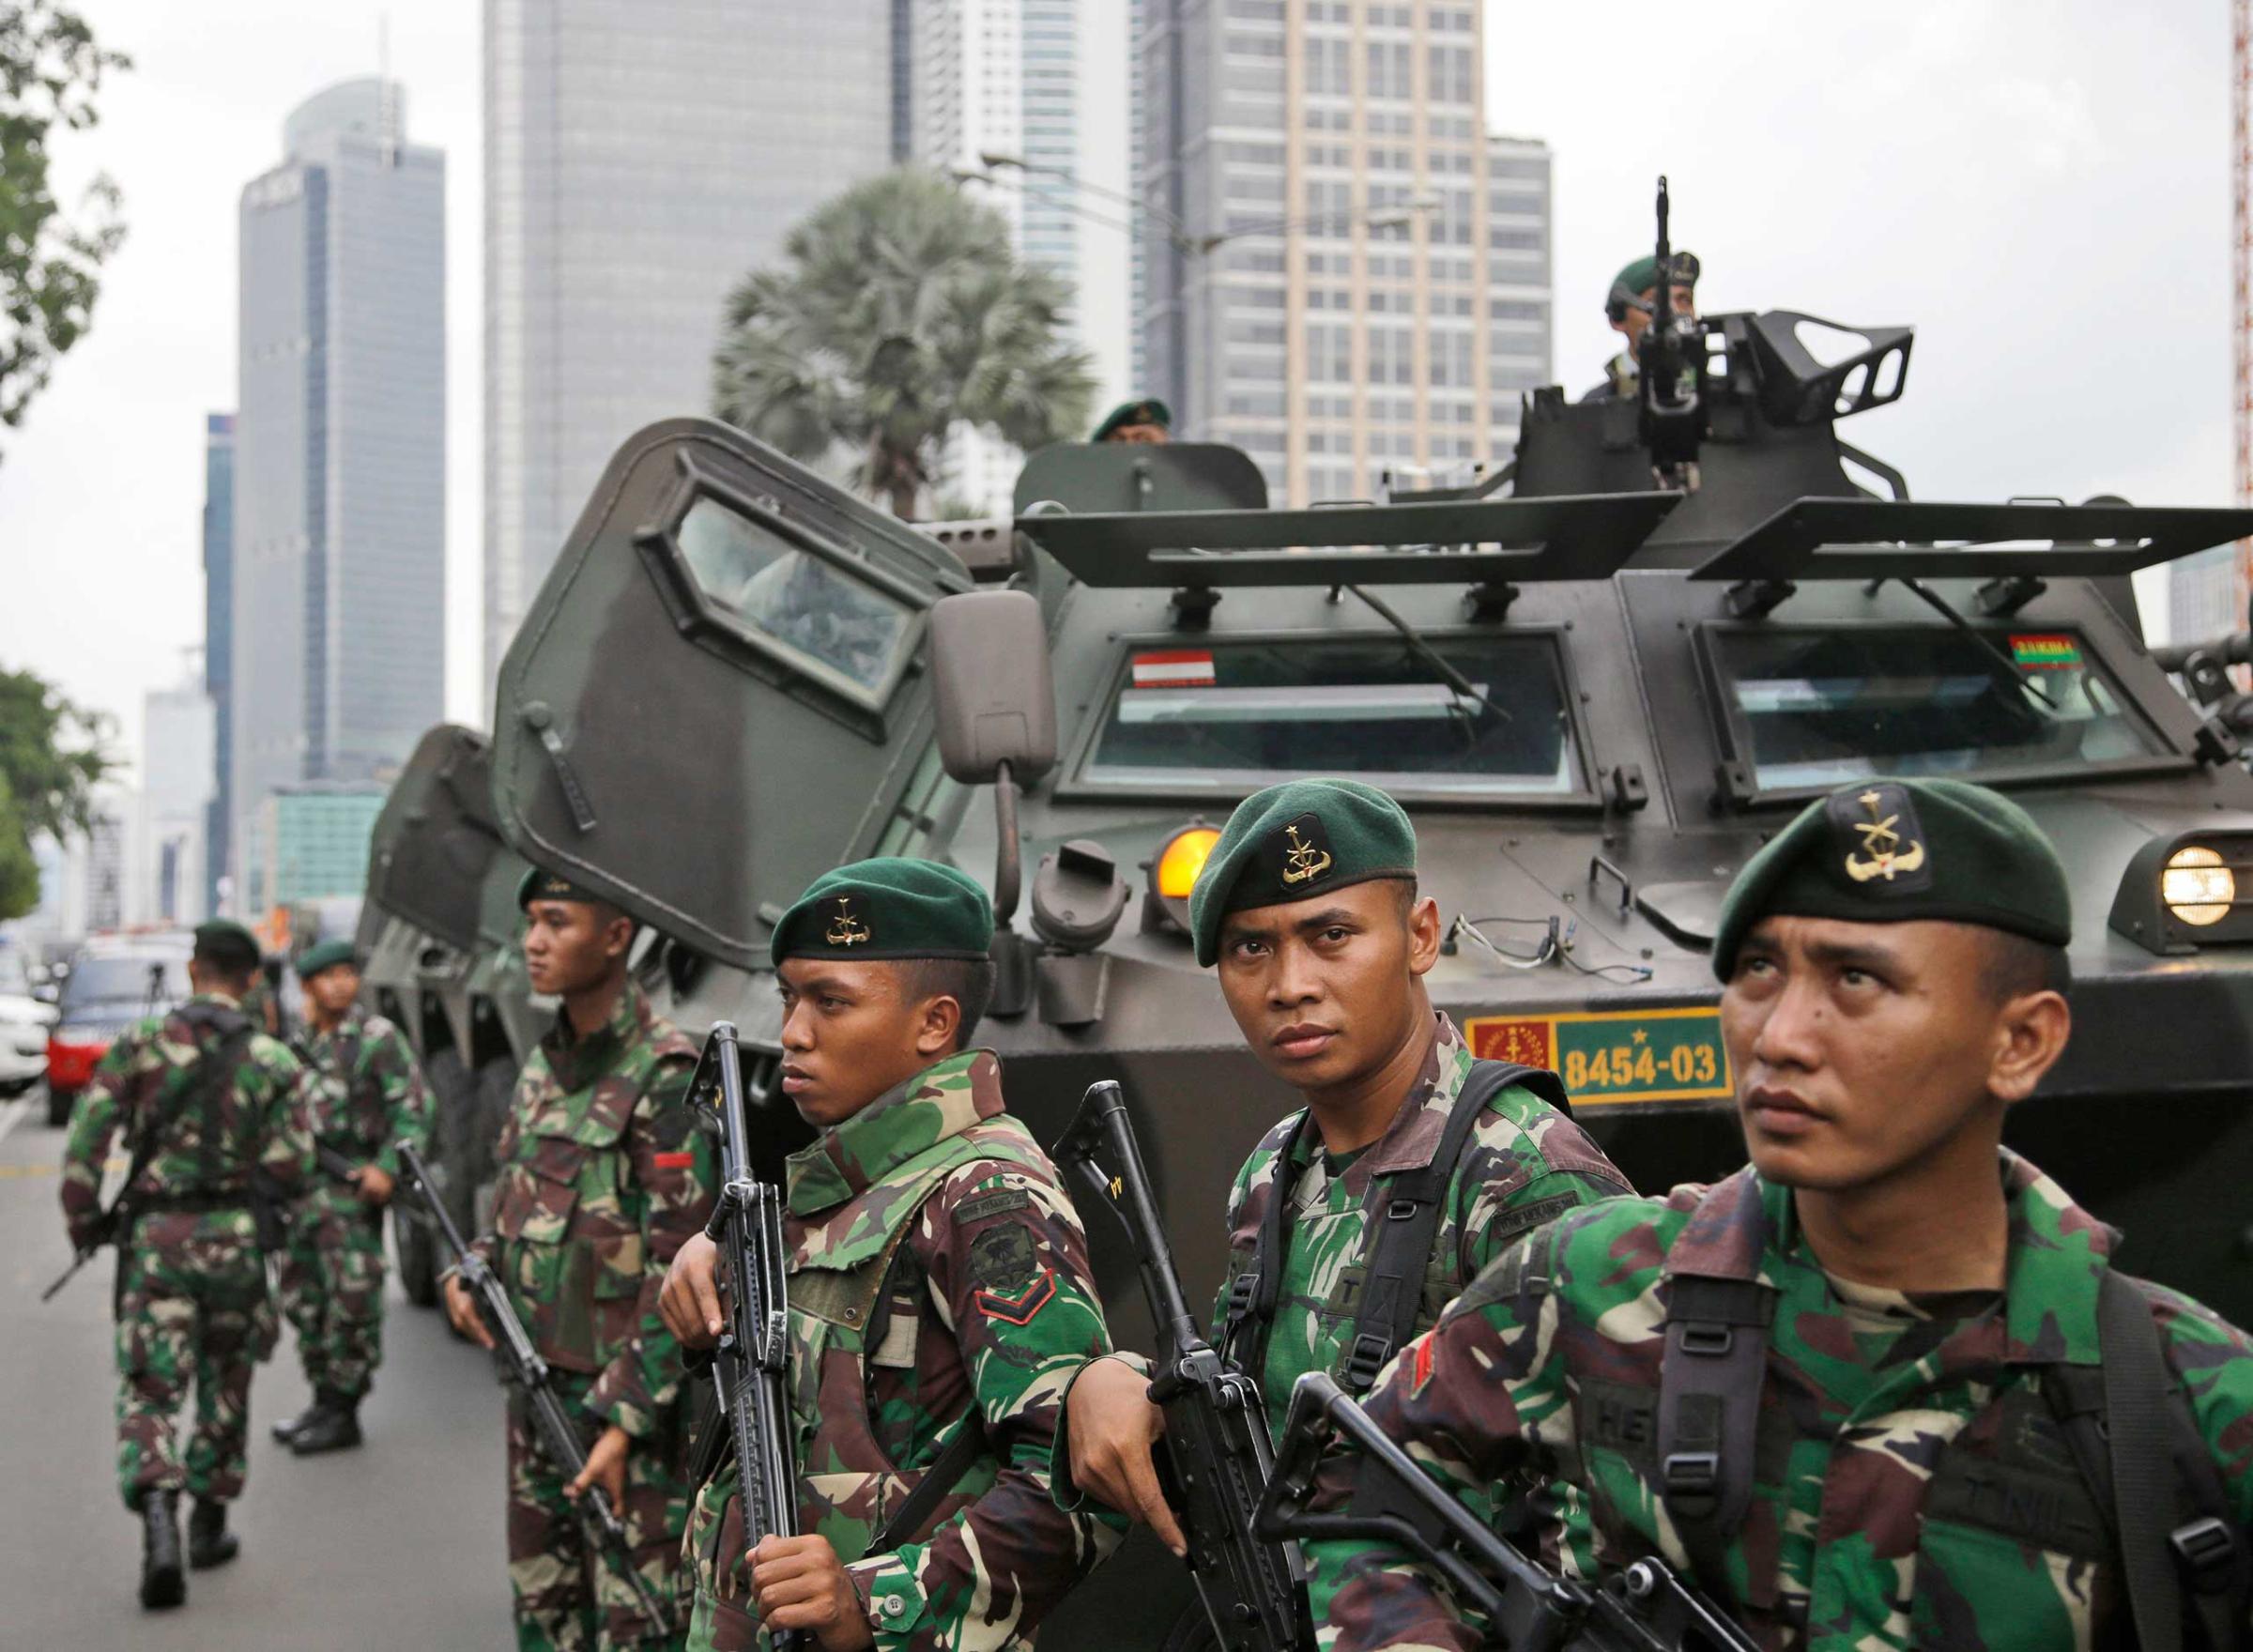 Soldiers stand guard near the site where an explosion went off in Jakarta, Indonesia, Jan. 14, 2016.